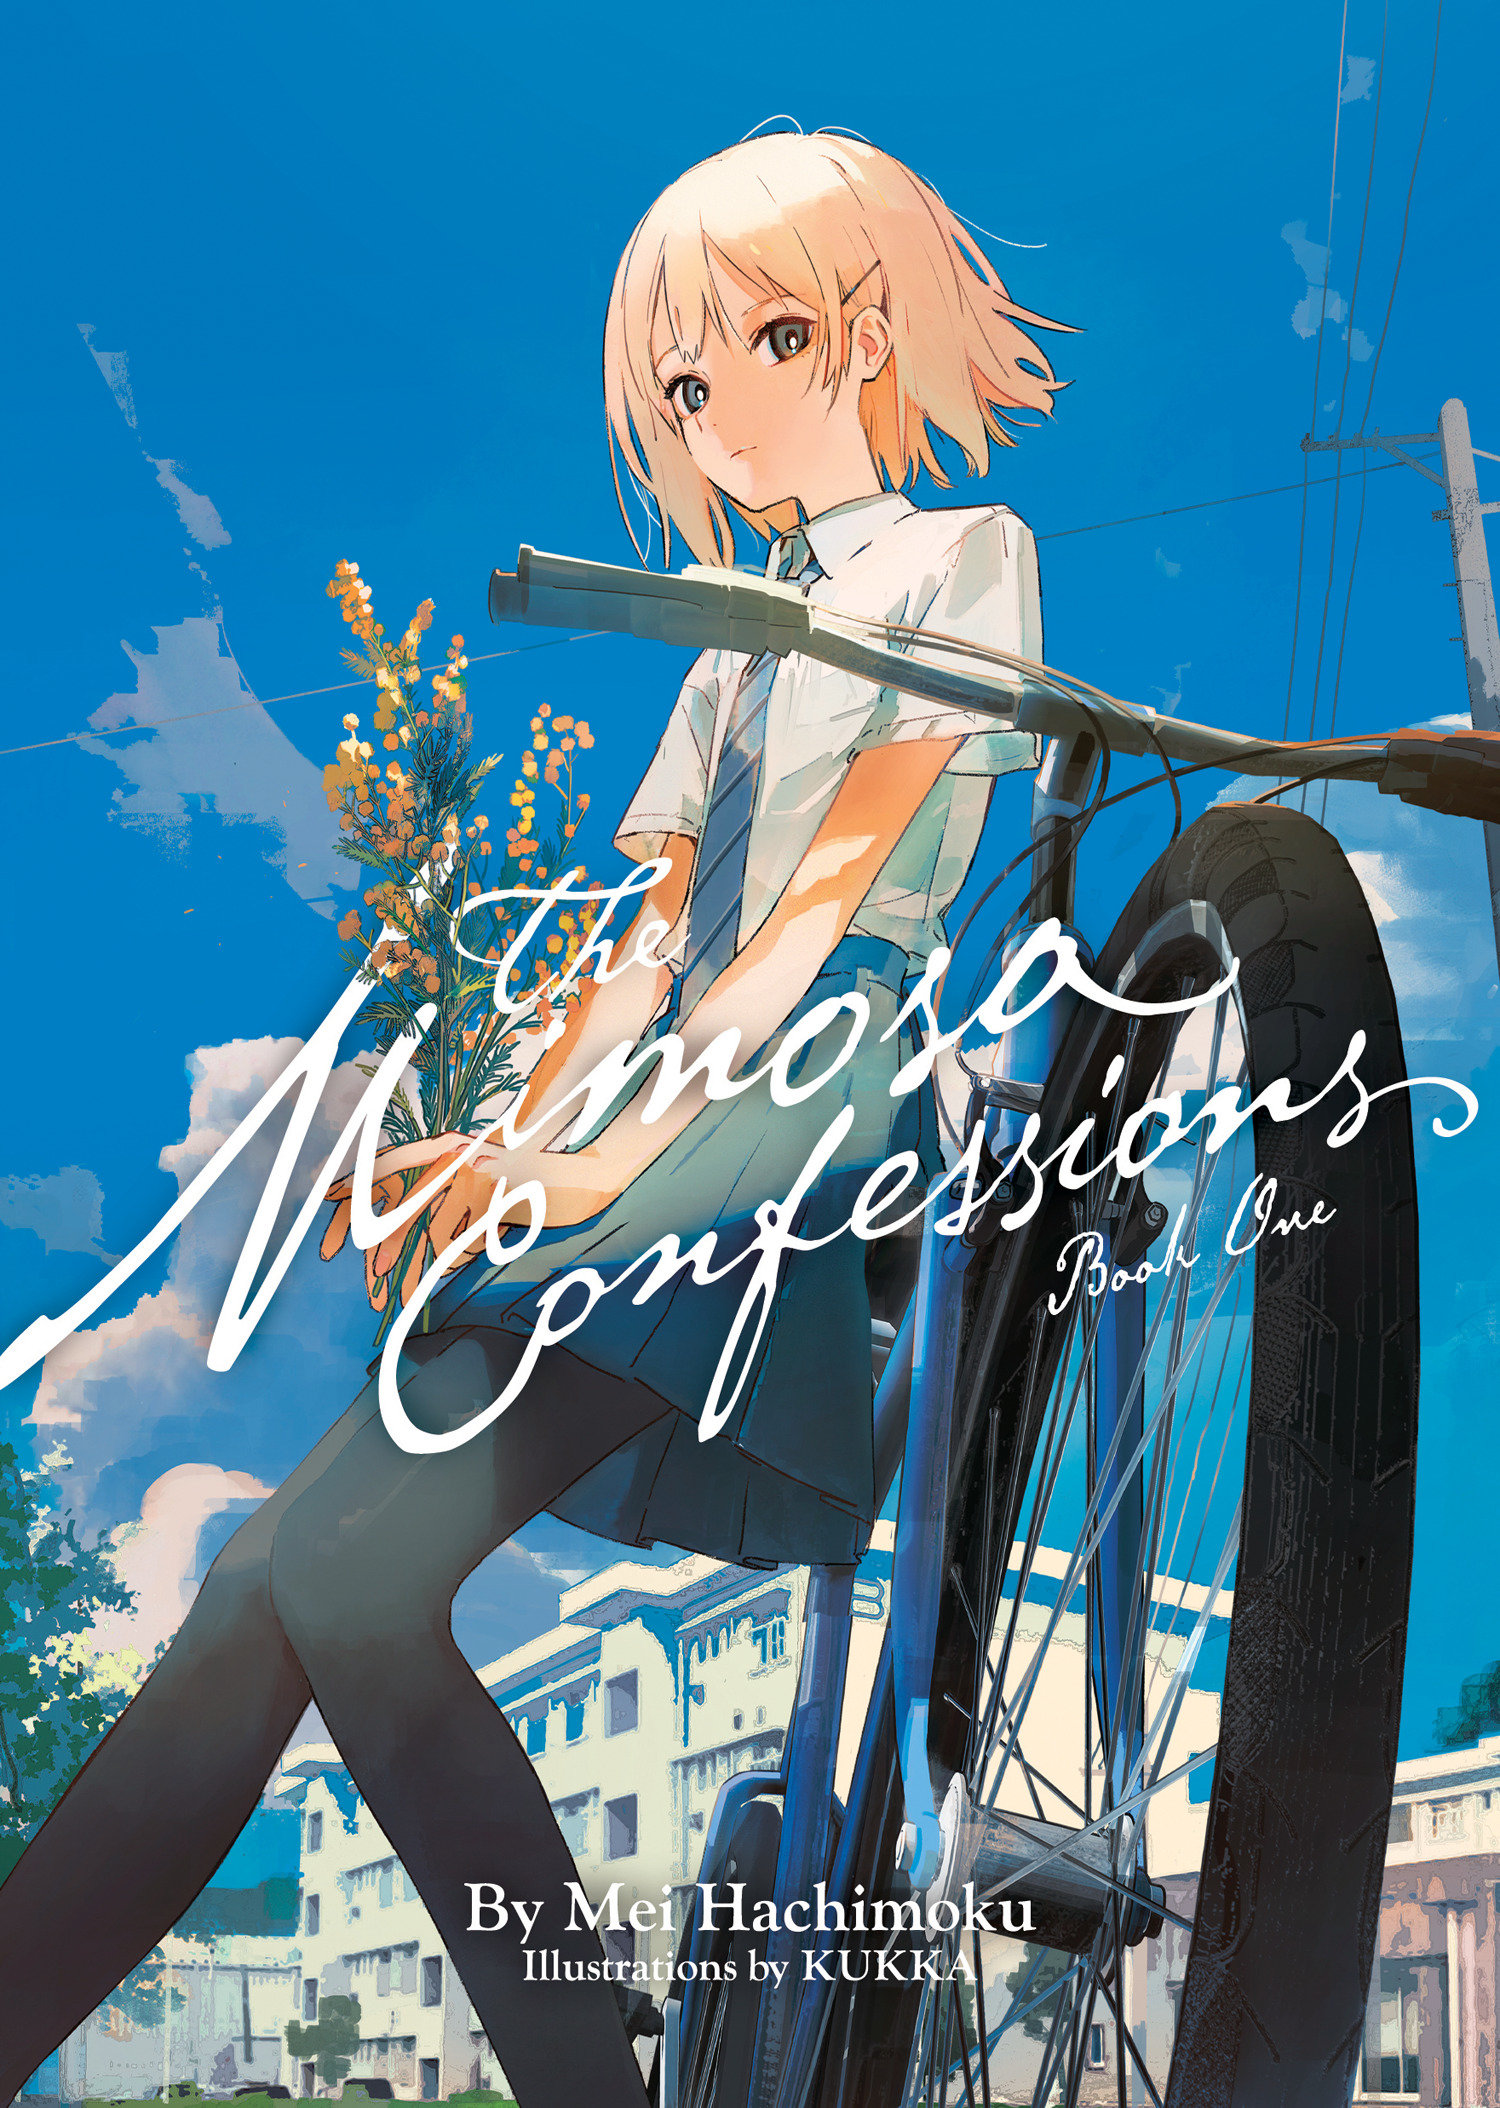 The Mimosa Confessions Light Novel Volume 1